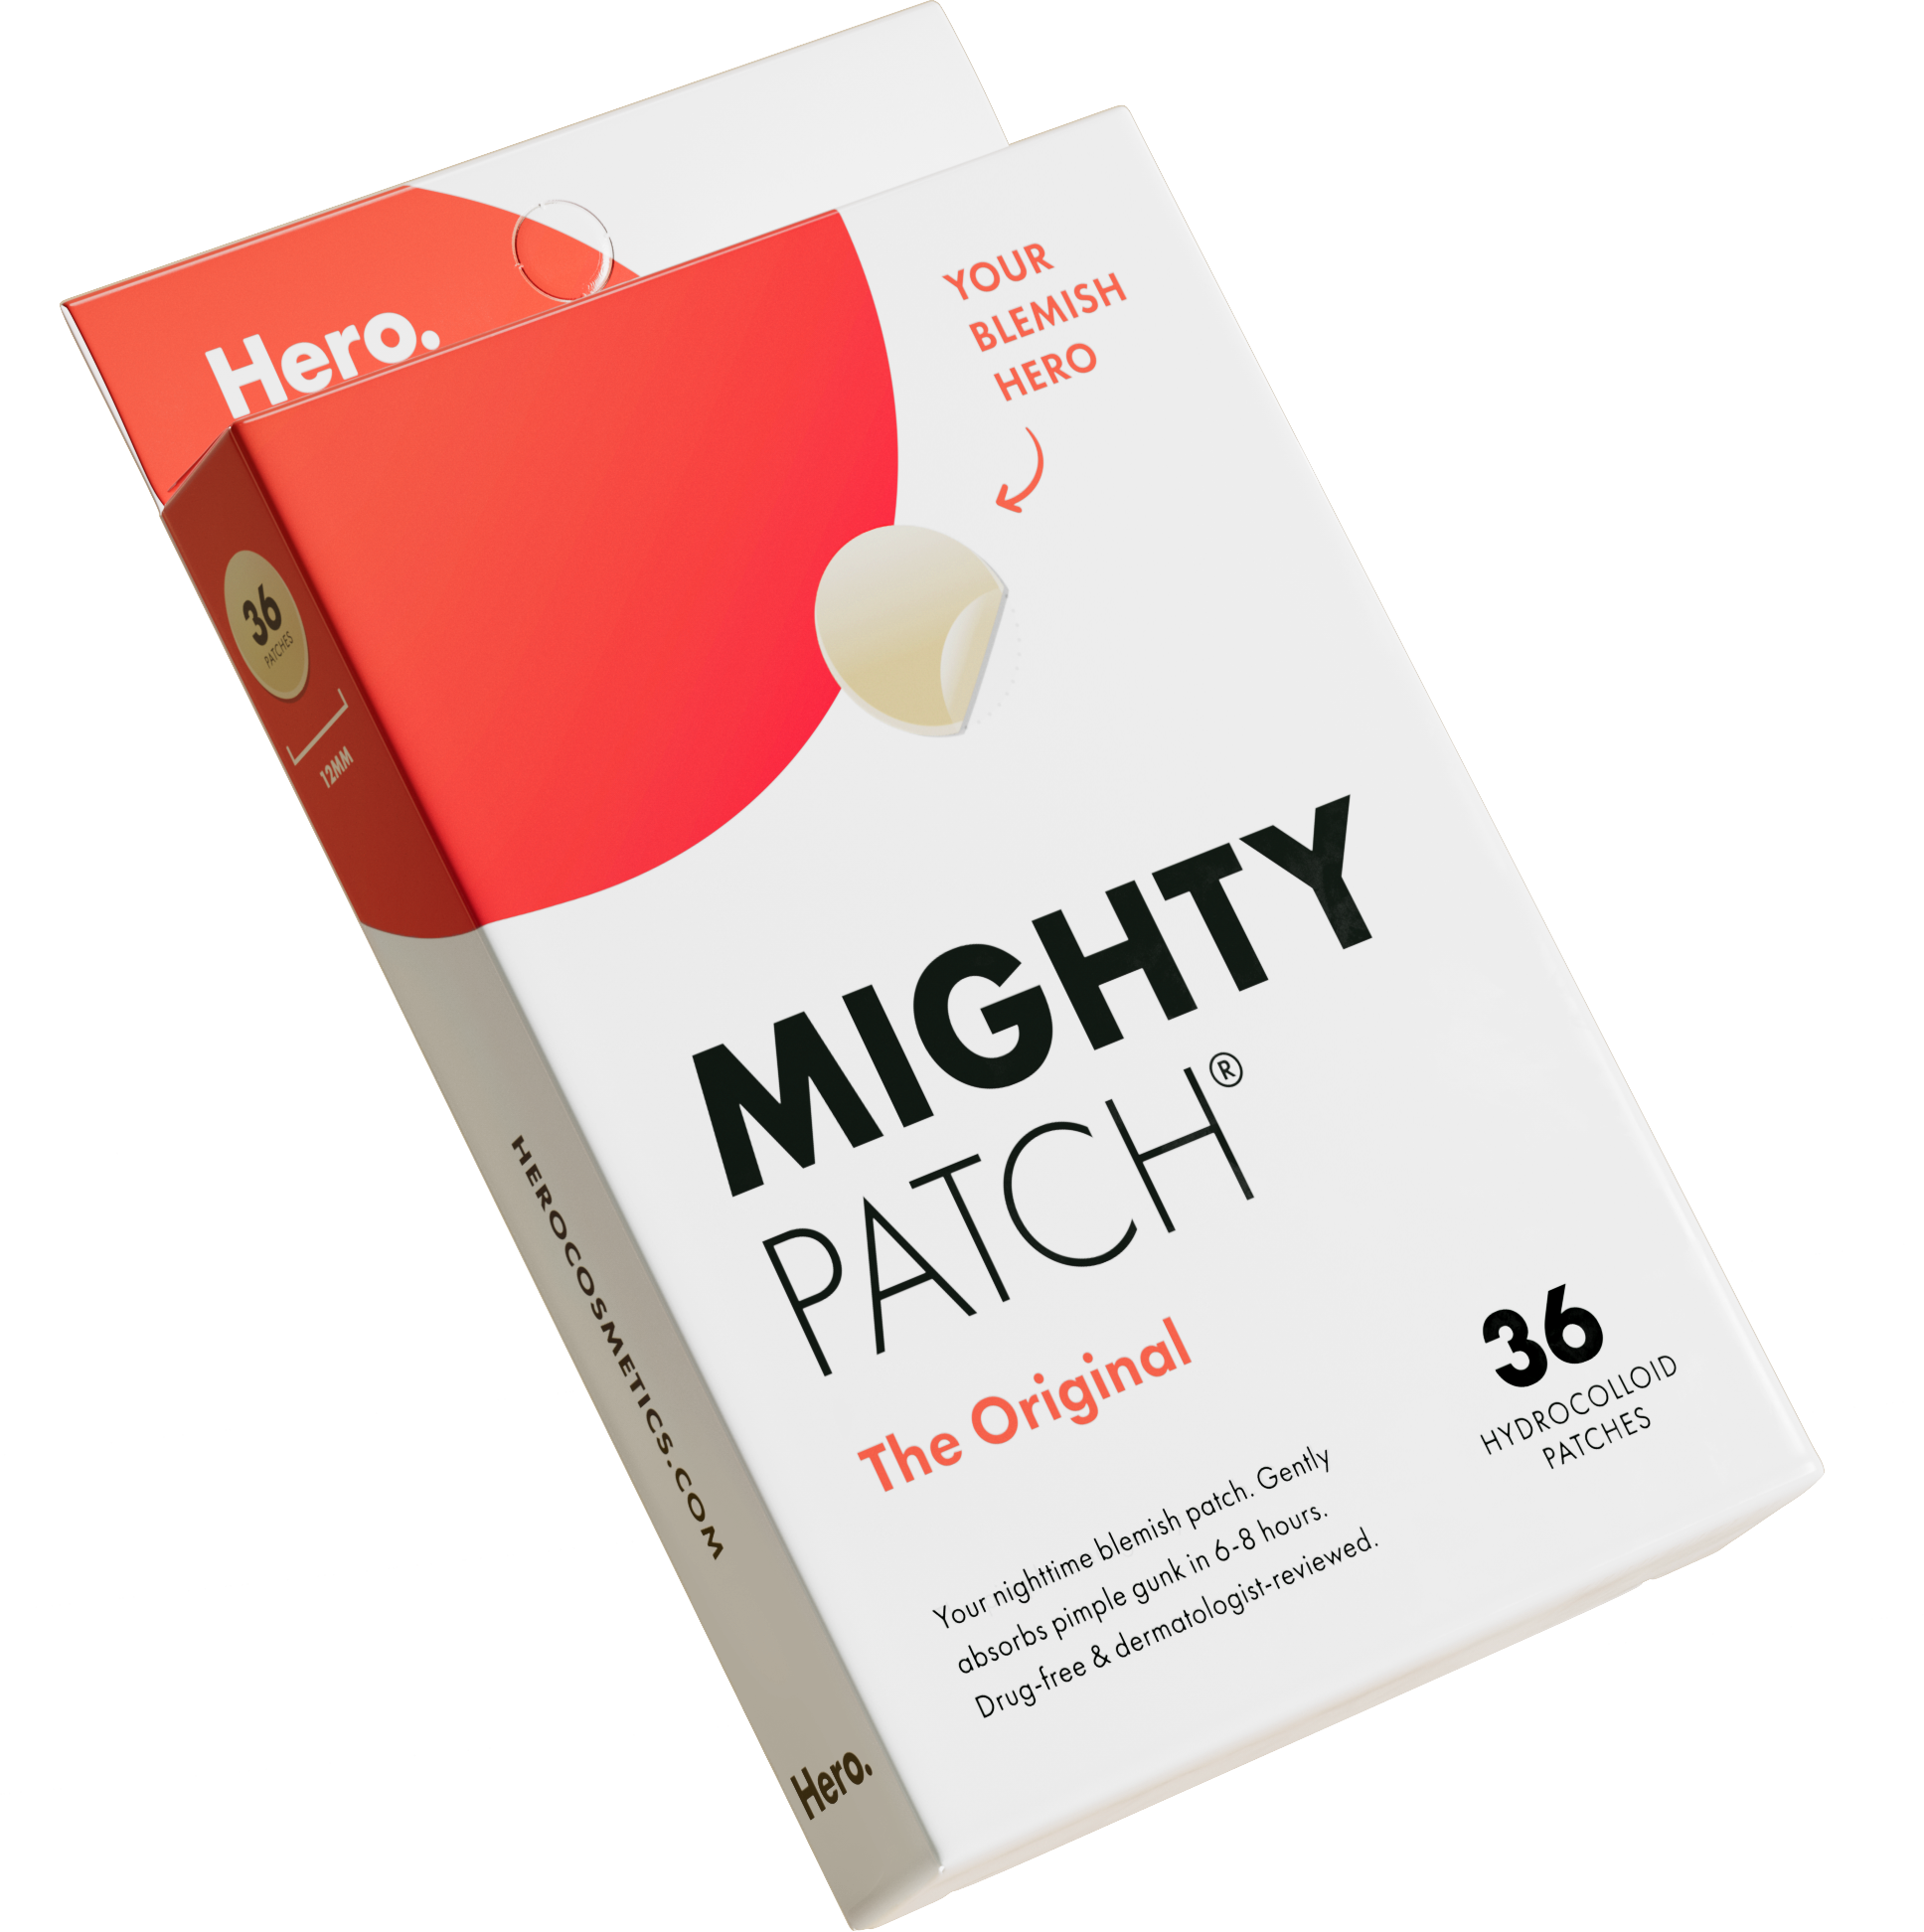 Hero Mighty Patch Patches, 8 count